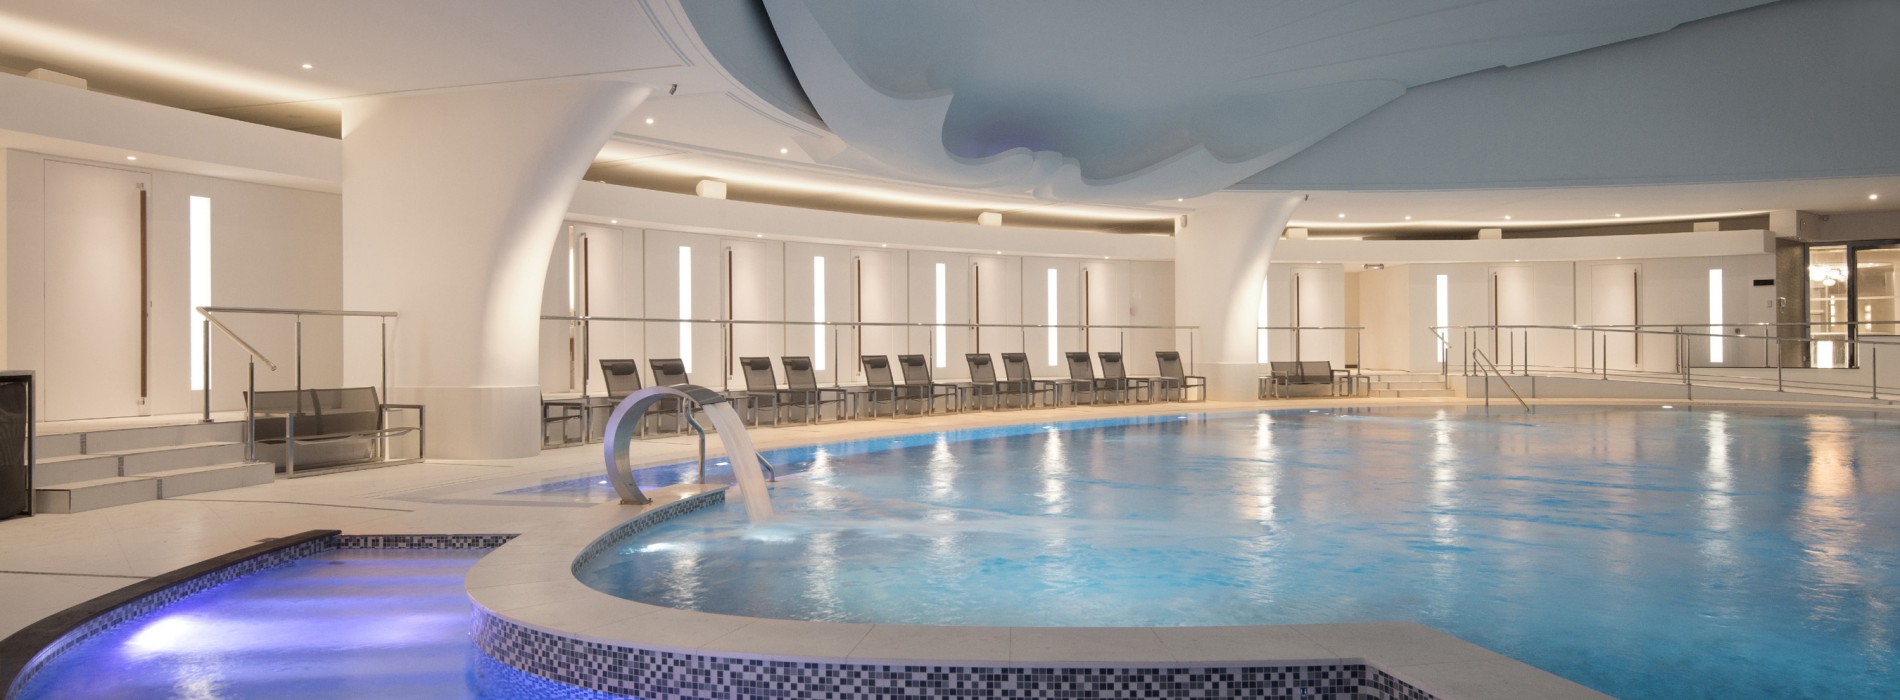 Enjoy Thermes Marins Spa Experience in Monaco